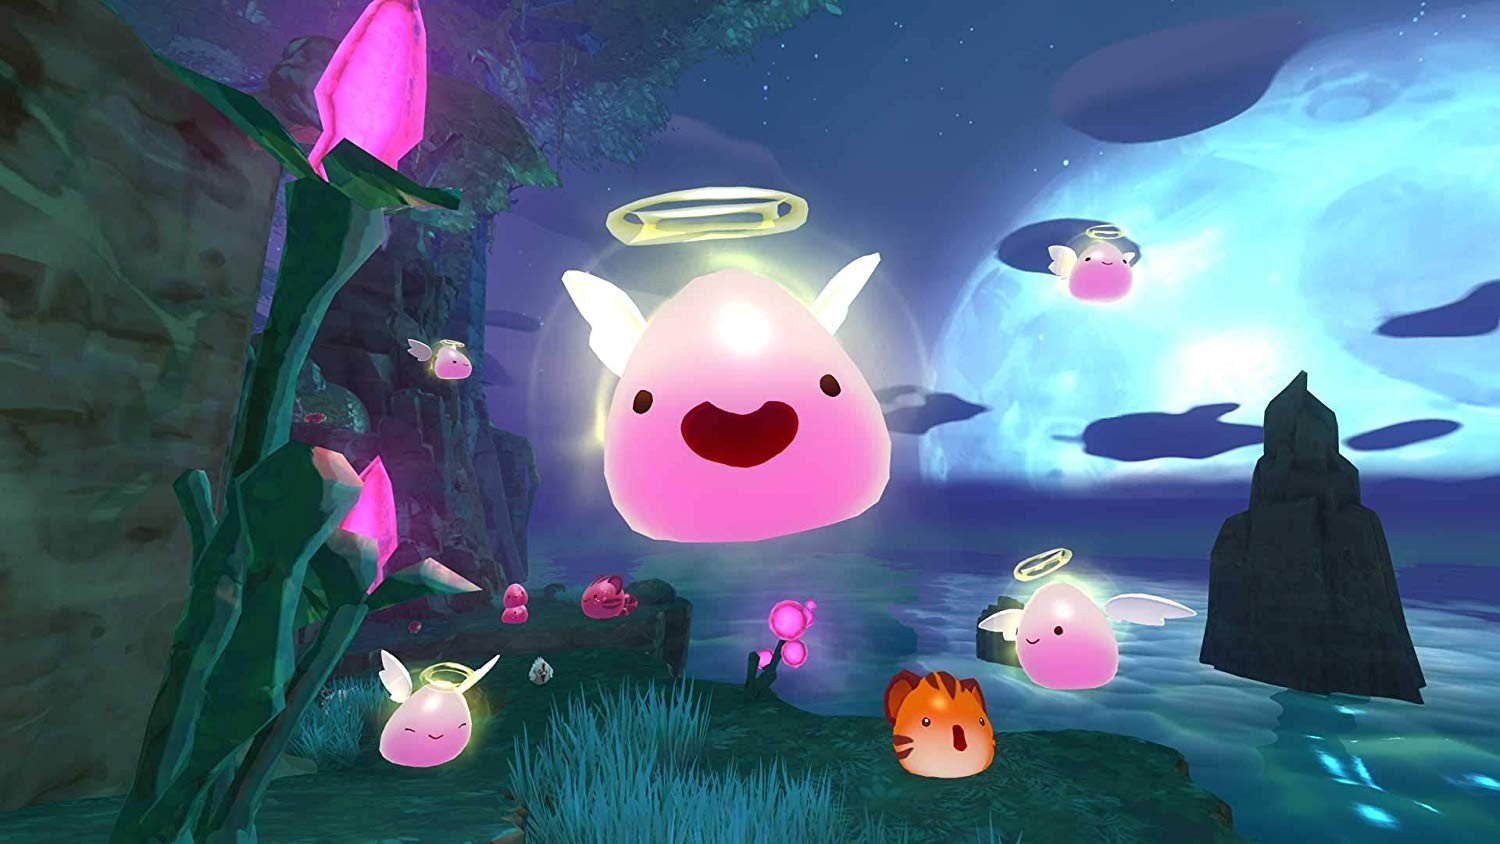 Slime Rancher, Slime Rancher [Deluxe Edition], PS4, PlayStation 4, XONE, Xbox One, Skybound Games, Monomi Park, release date, features, price, pre-order now, trailer, Slime Rancher Deluxe Edition, Europe, North America, US